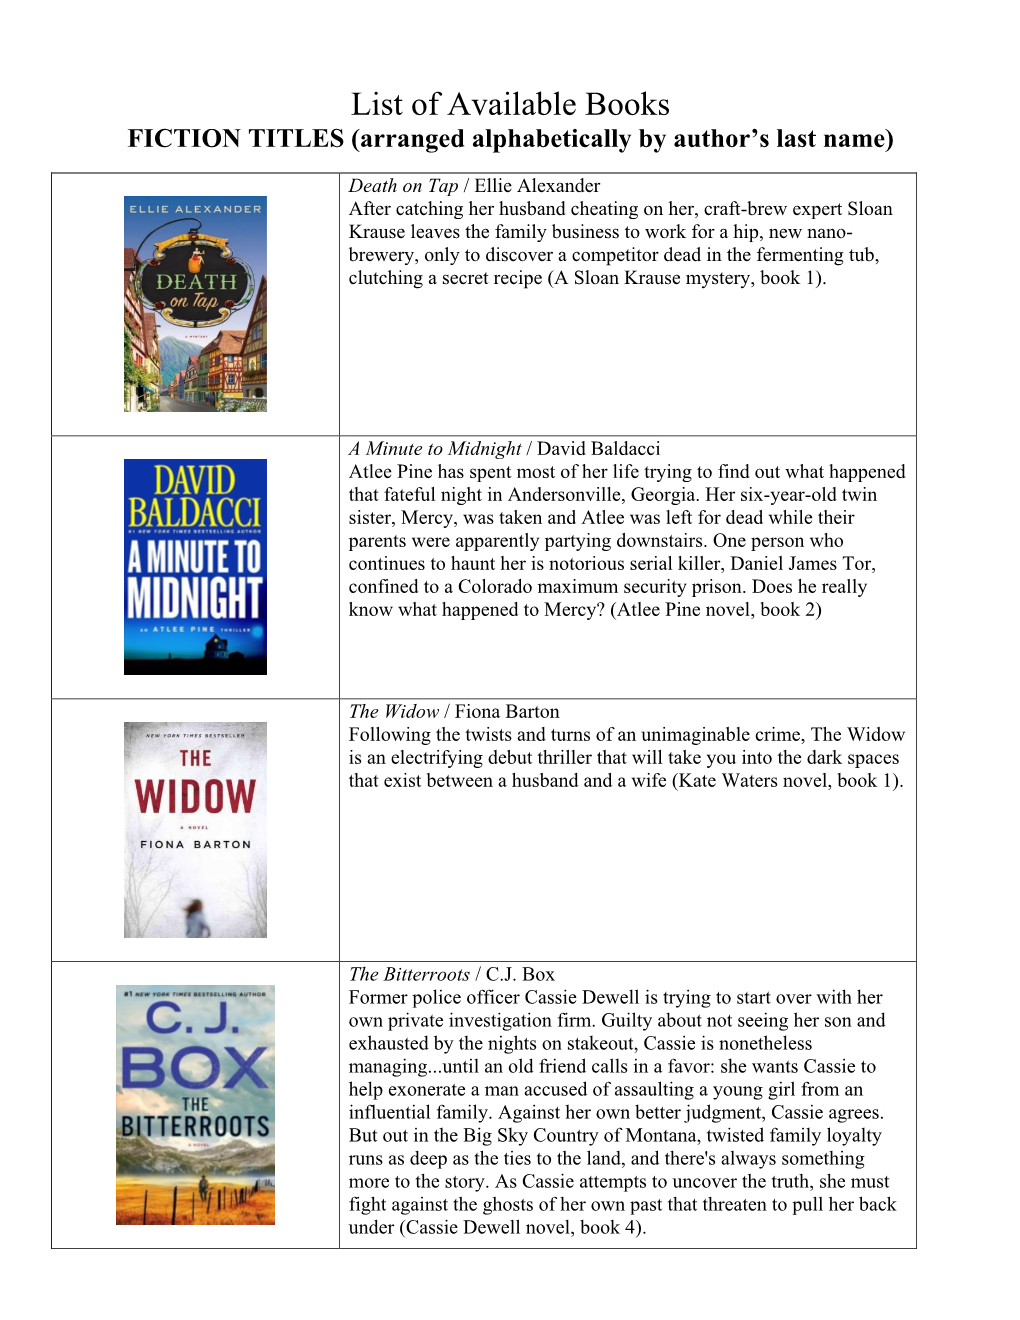 FICTION TITLES (Arranged Alphabetically by Author’S Last Name)